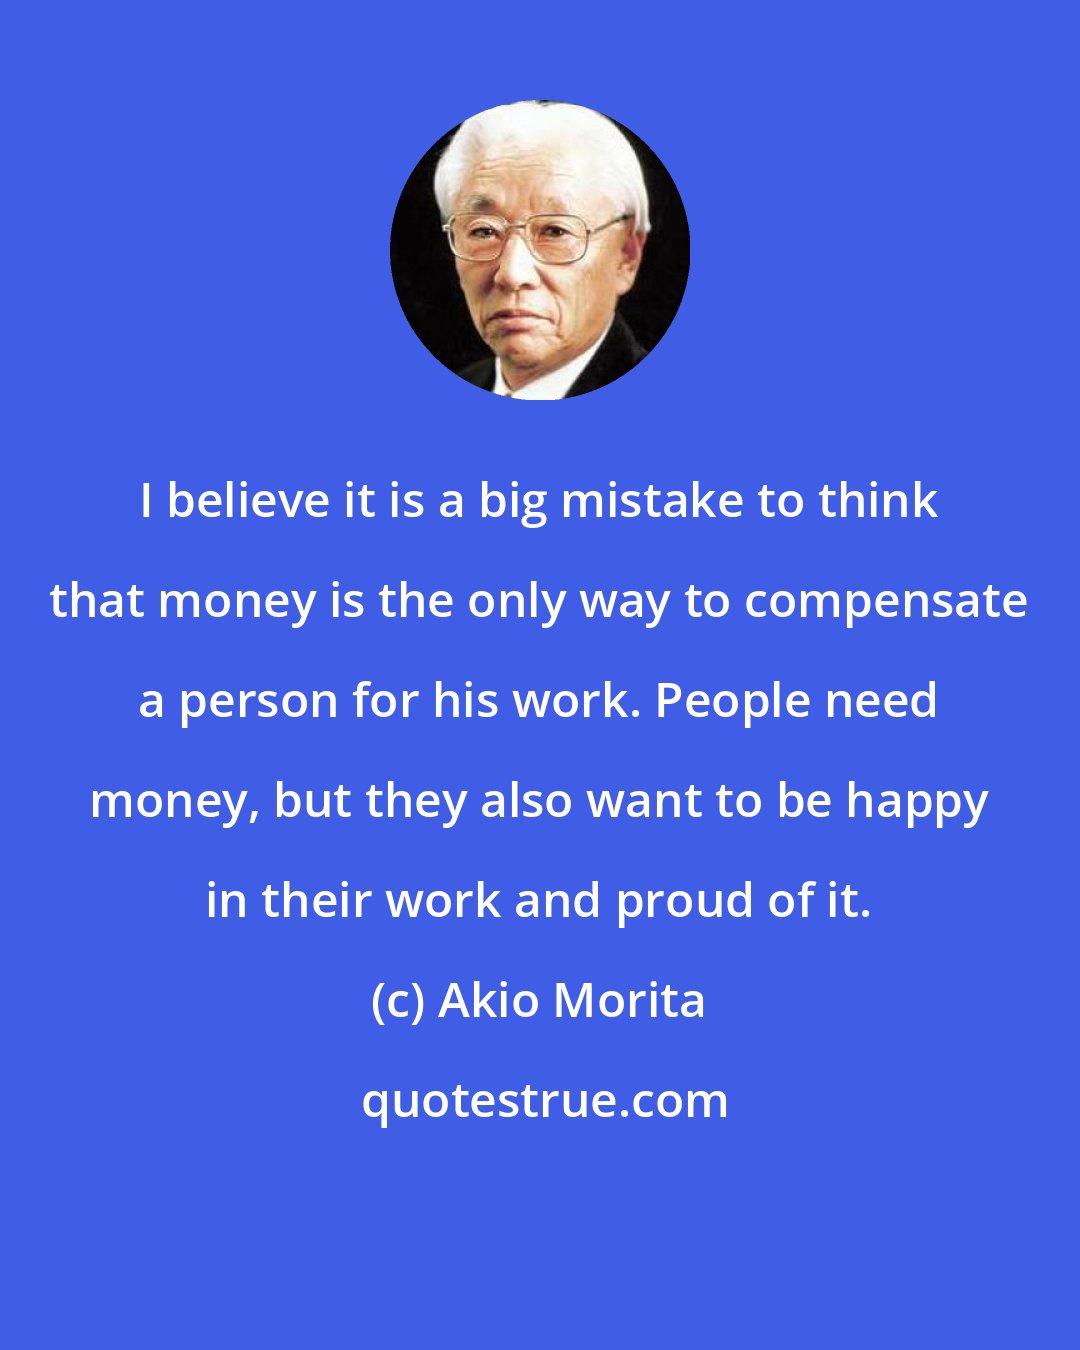 Akio Morita: I believe it is a big mistake to think that money is the only way to compensate a person for his work. People need money, but they also want to be happy in their work and proud of it.